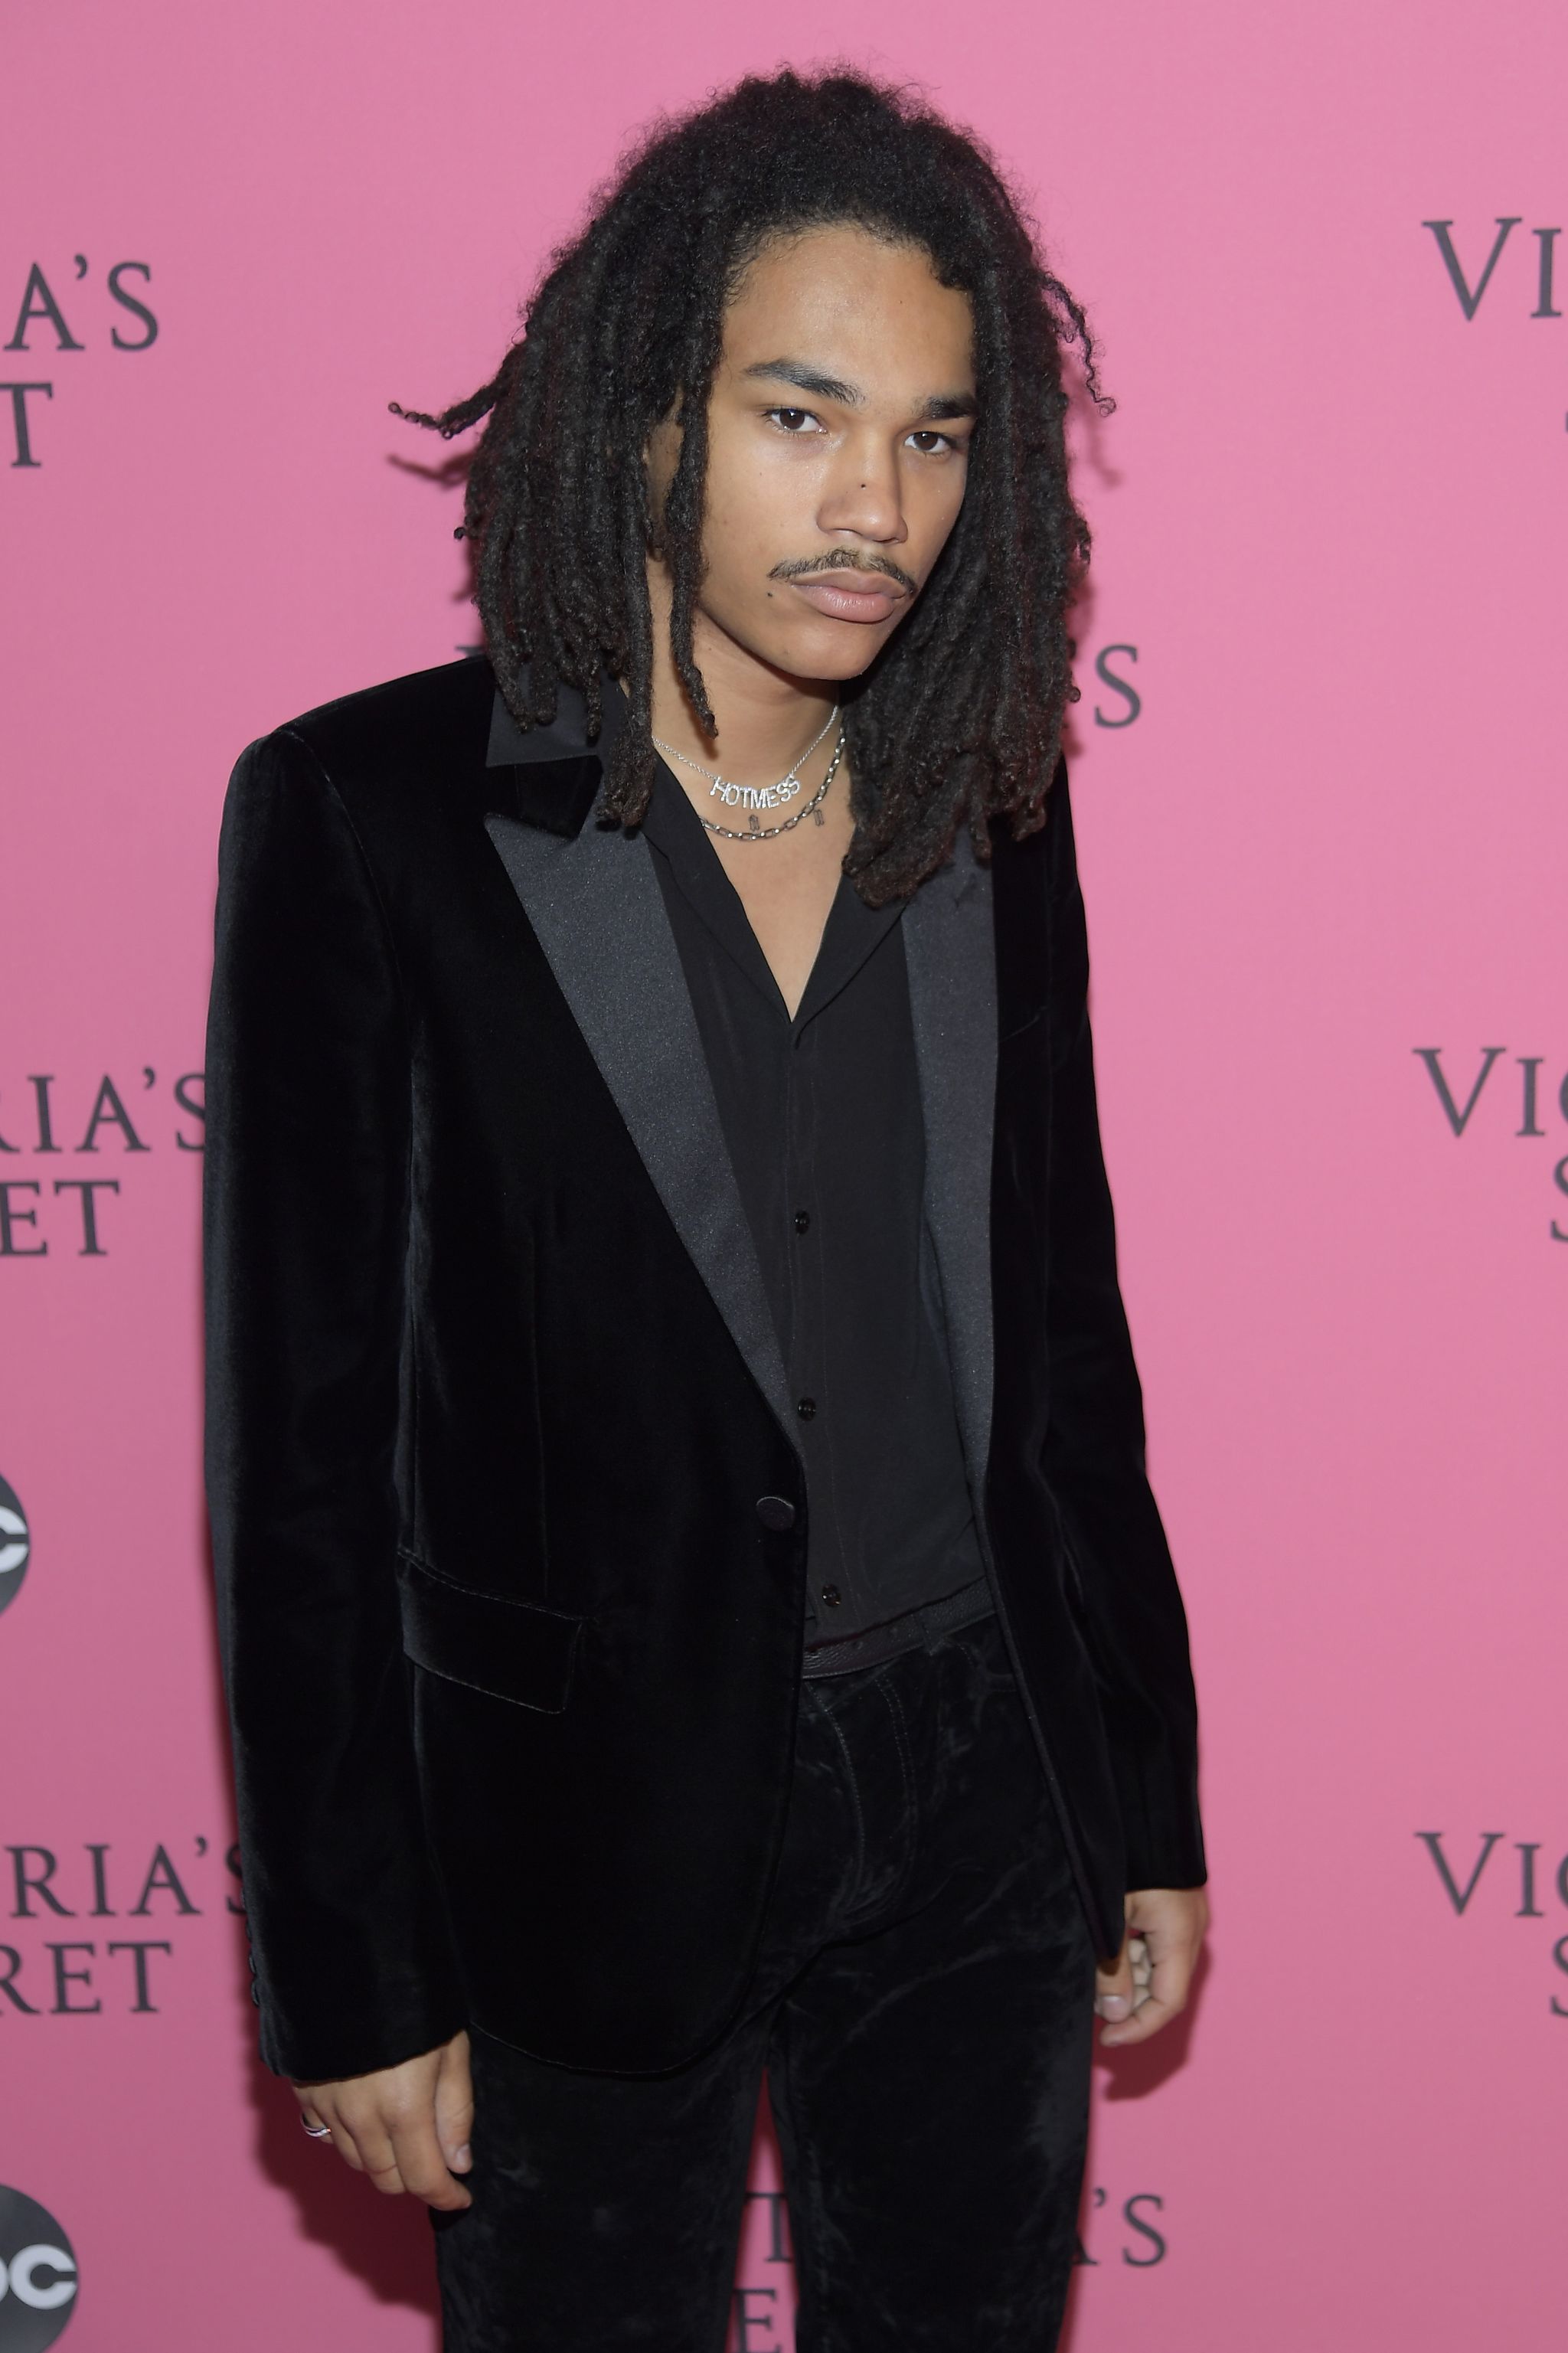 Hairstyle, Pink, Long hair, Suit, Fashion, Outerwear, Black hair, Premiere, Formal wear, Event, 